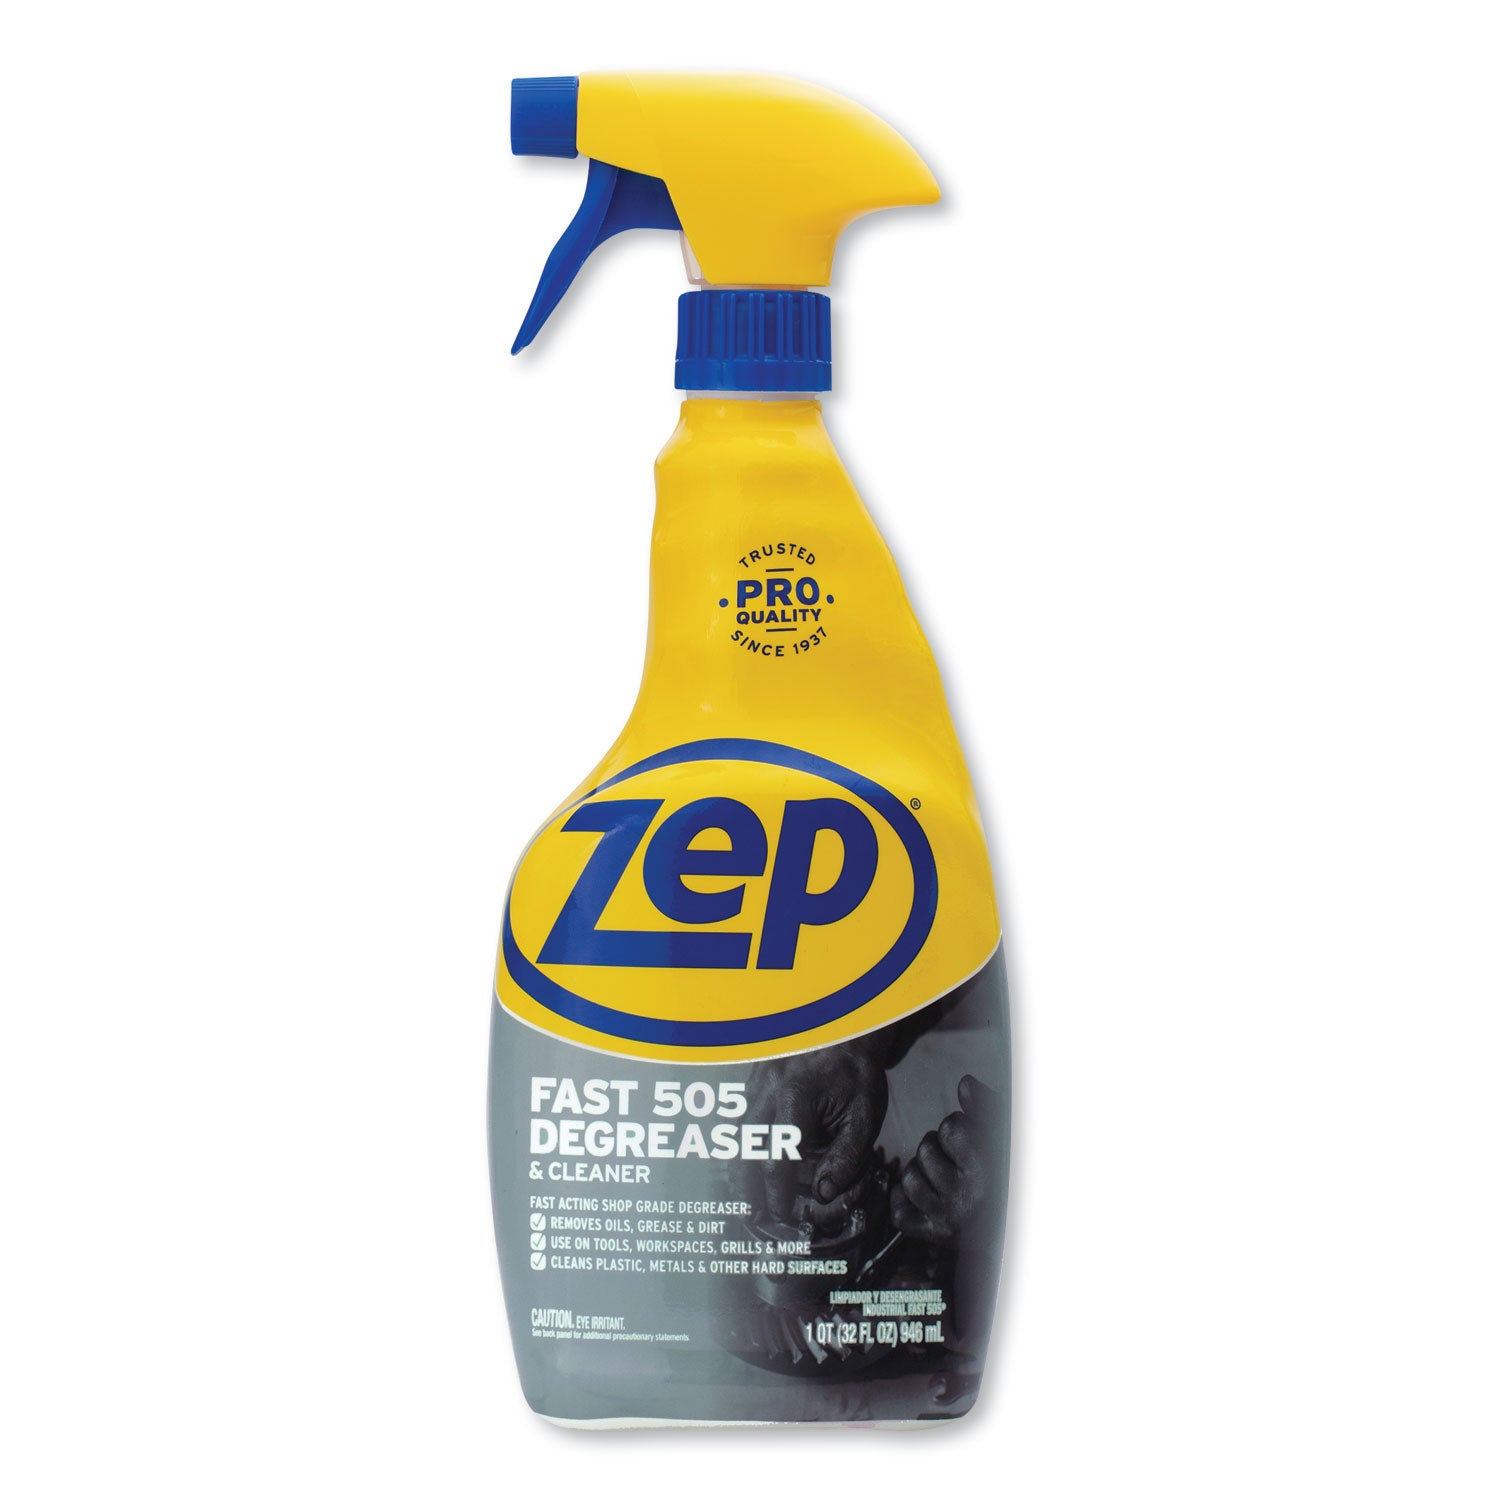 fast-505-cleaner-and-degreaser-32-oz-spray-bottle-12-carton_zpezu50532ct - 1